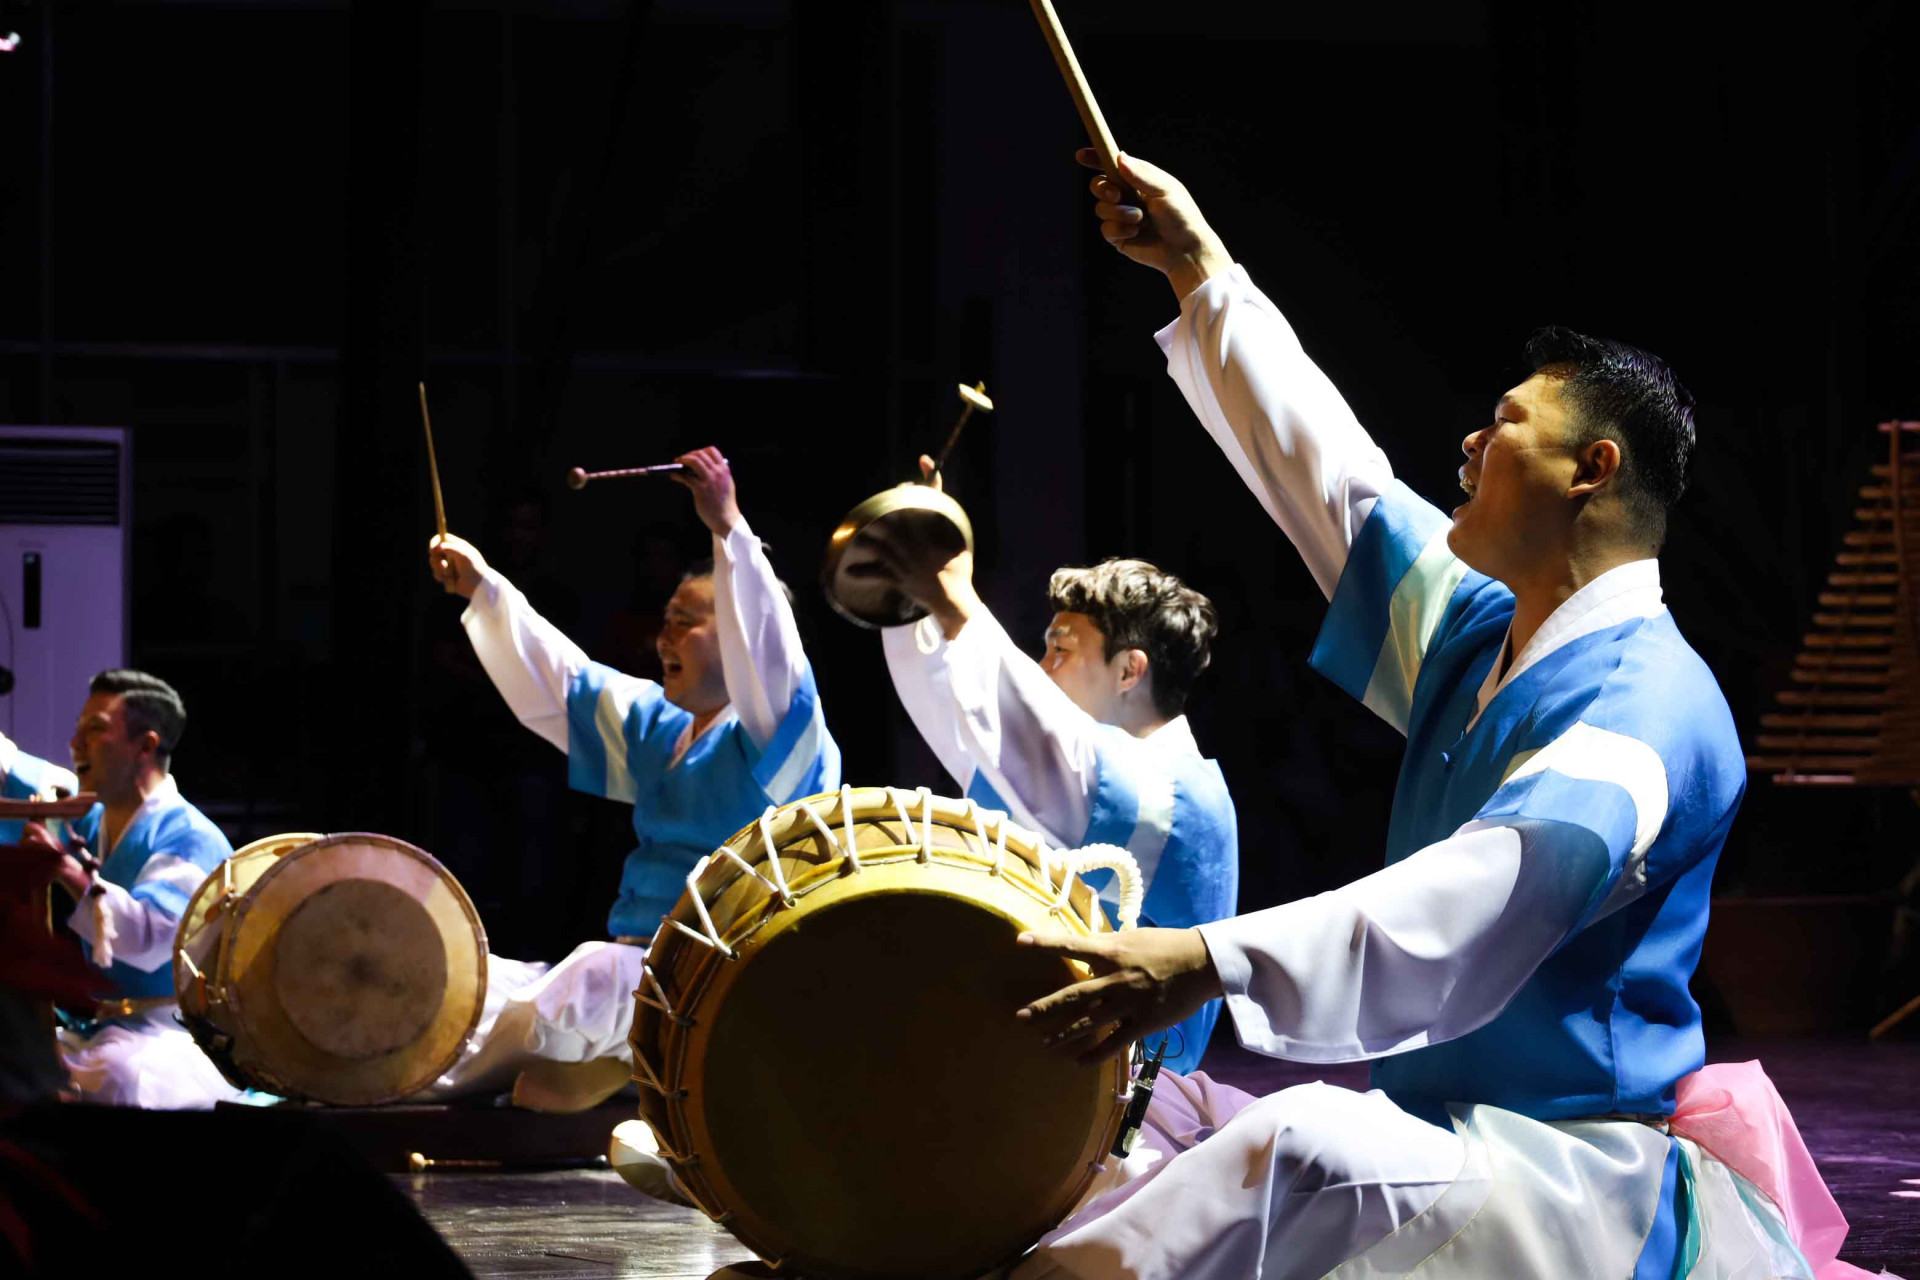 South Korean artists performing with traditional musical instruments